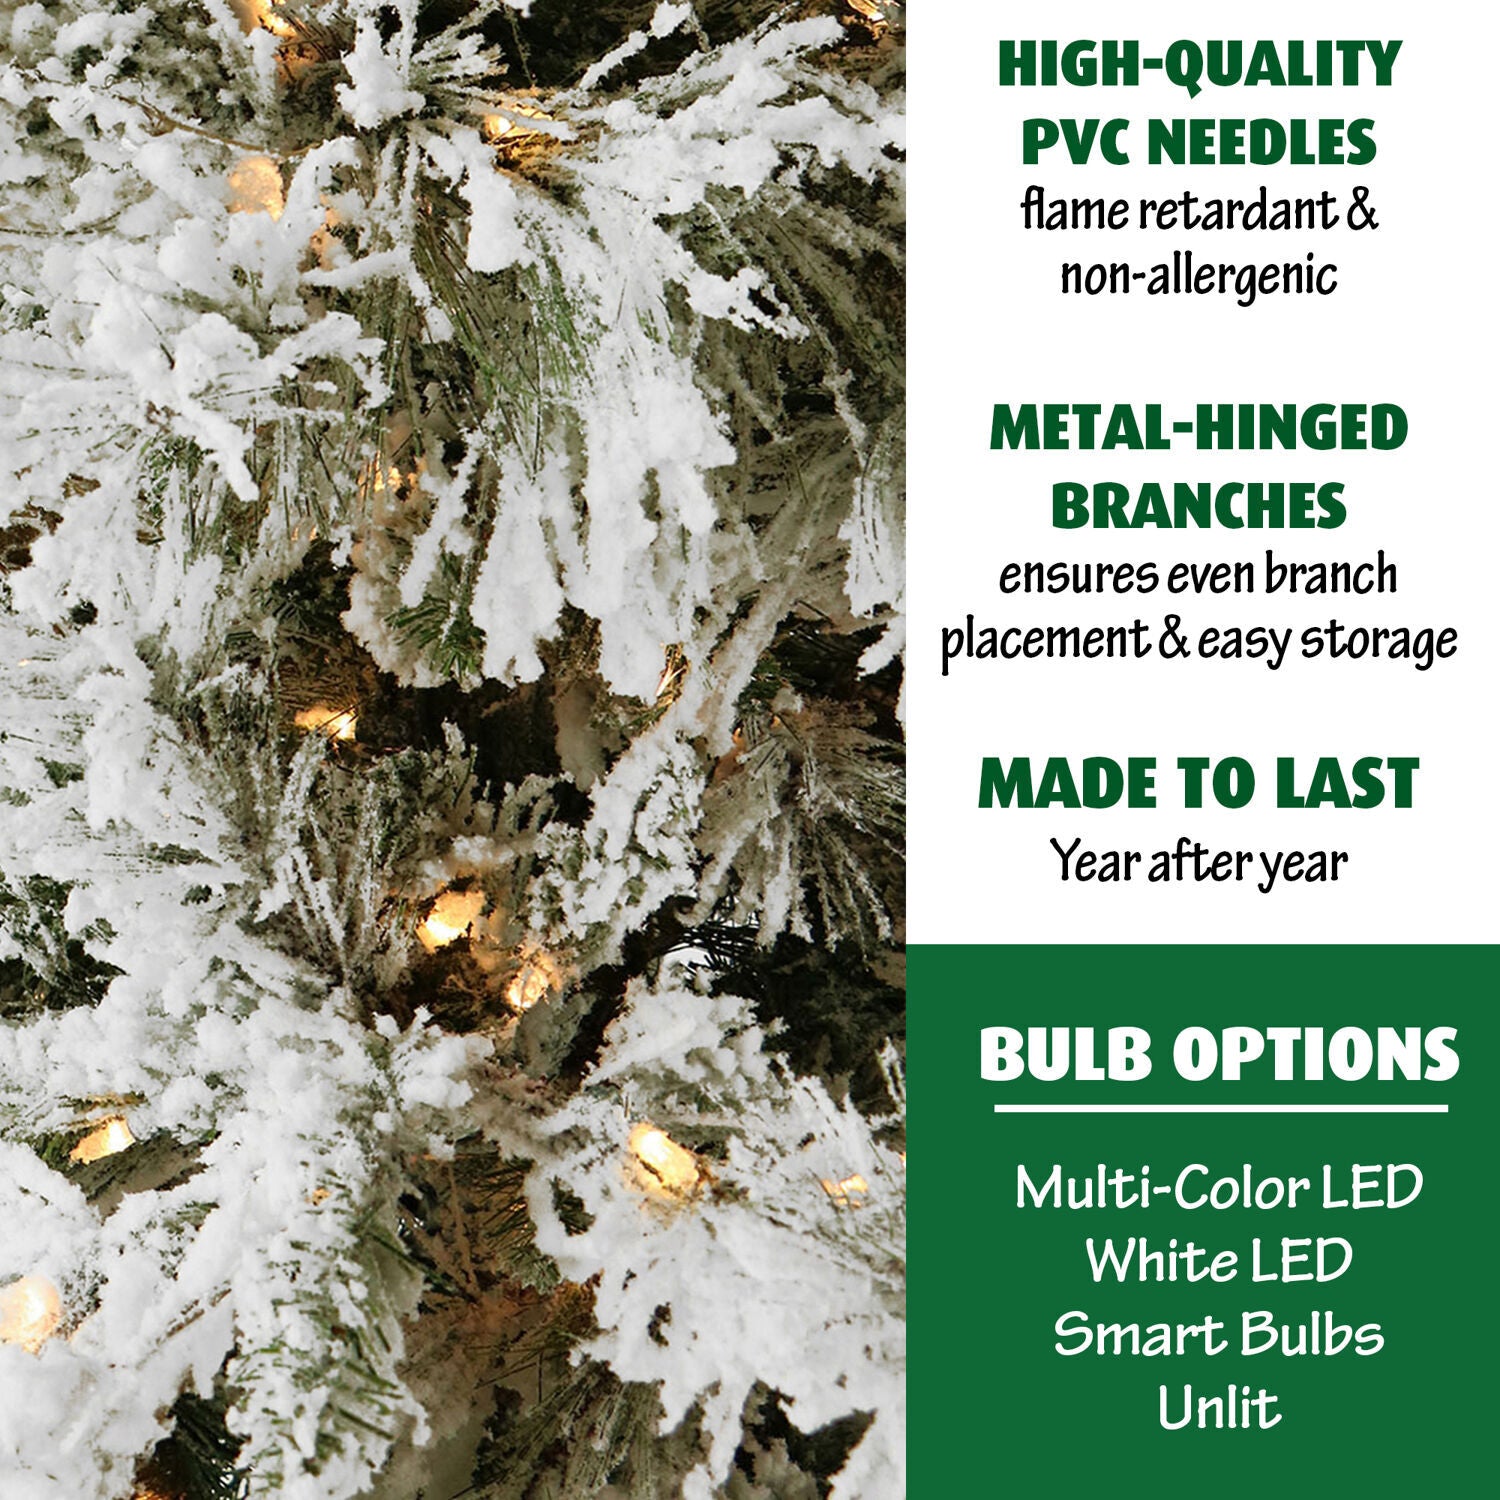 Fraser Hill Farm -  4-Ft.Snowy Pine Flocked Slim Christmas Tree with Warm White LED Lights